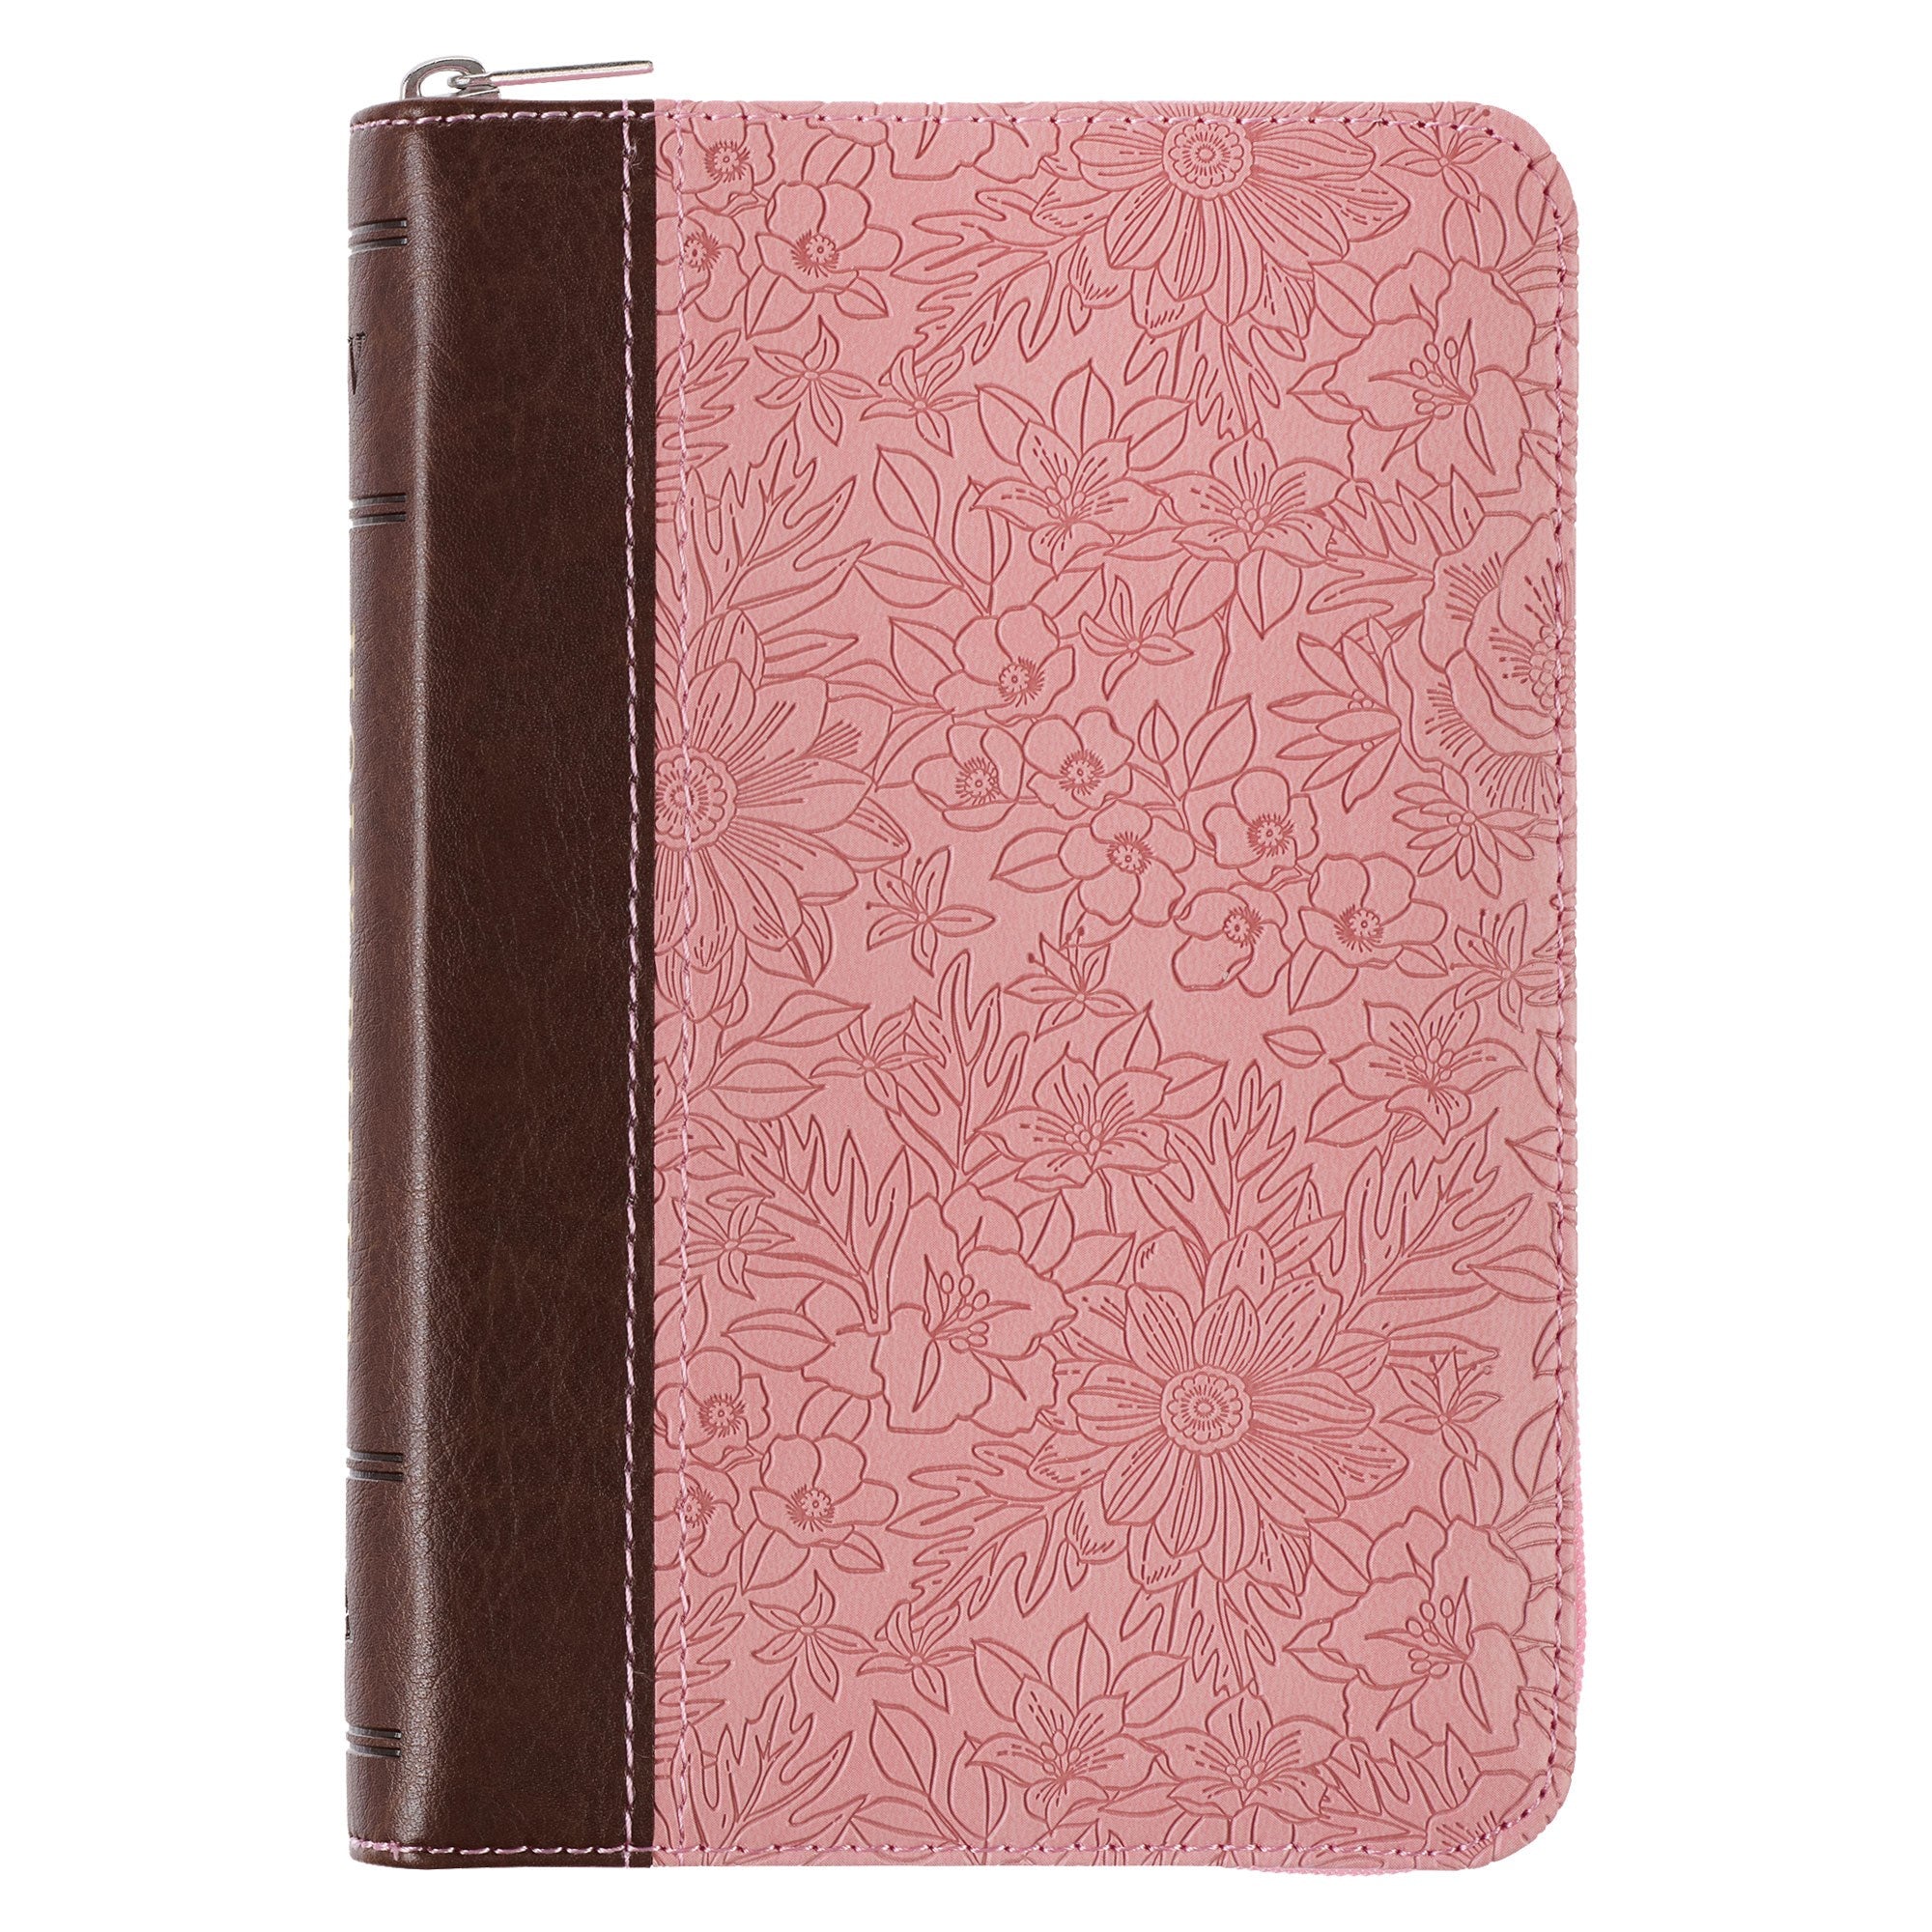 Seed of Abraham Christian Bookstore - (In)Courage - KJV Compact Pocket Bible-Pink/Brown LuxLeather with Zipper